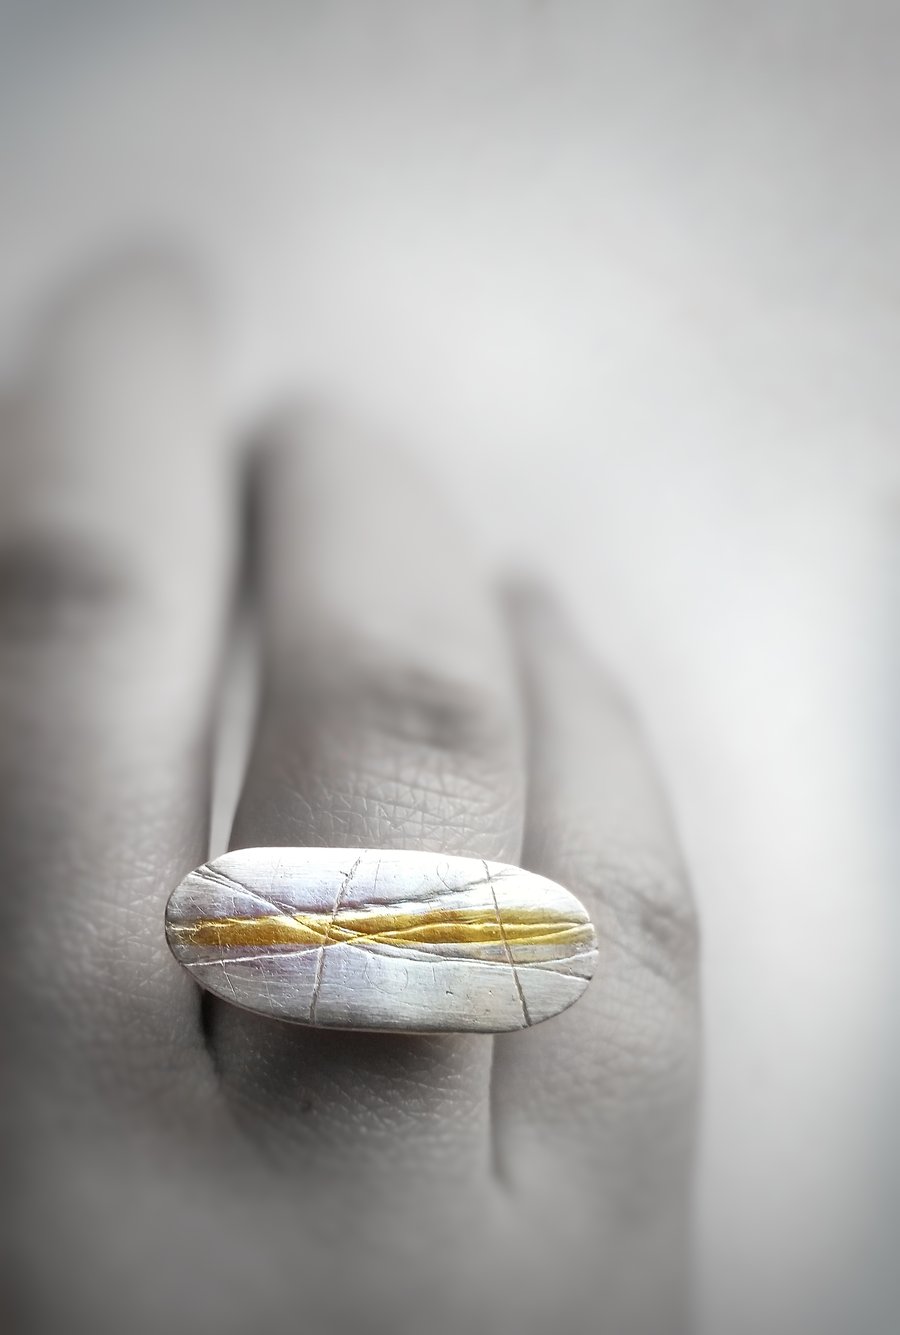 Organic feel adjustable textured silver ring with gold highlight.  UK handmade 